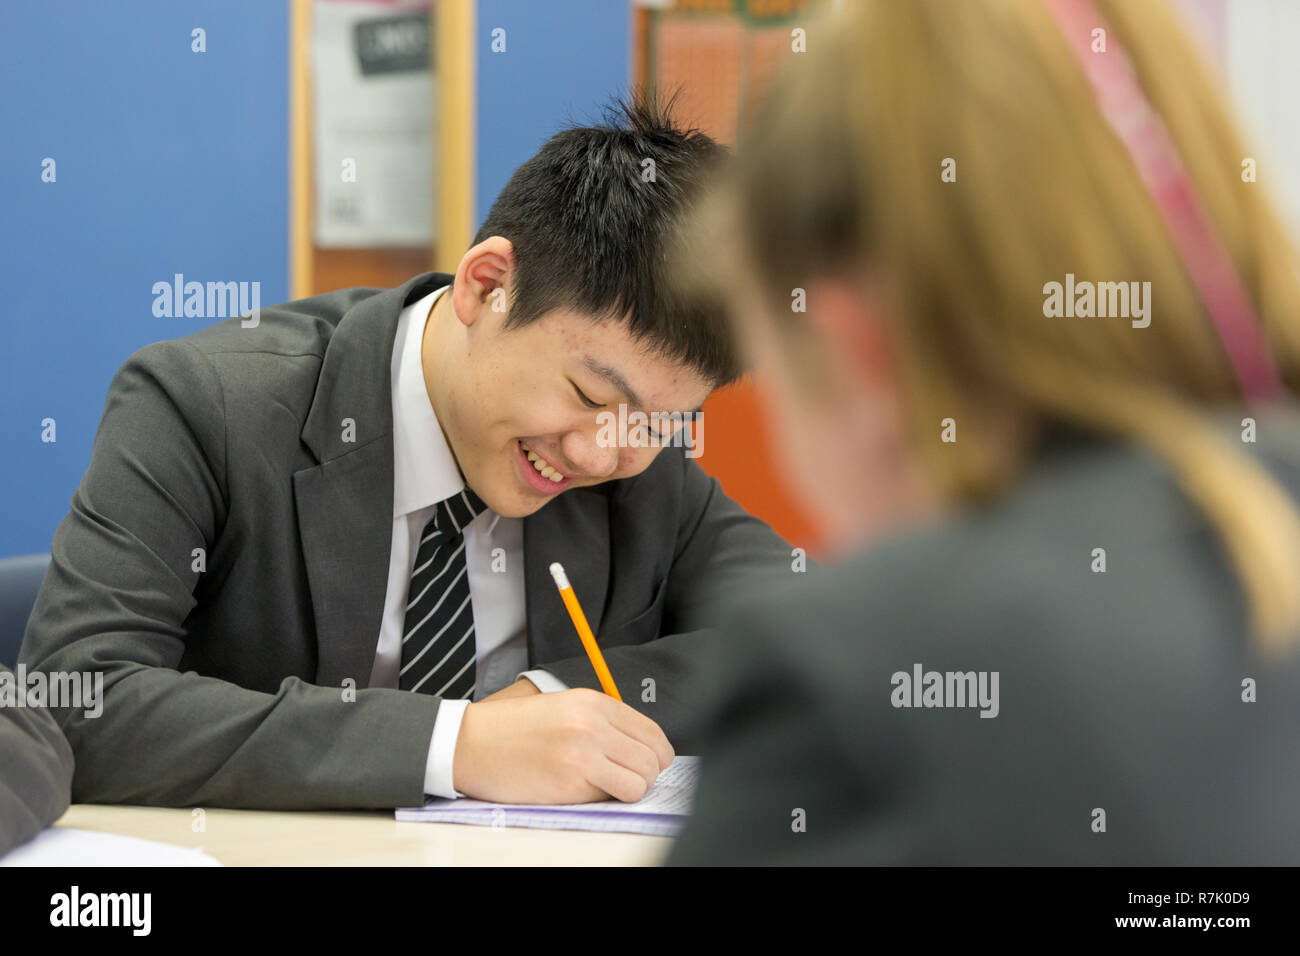 14 year old pupil in a classroom, eastern Asian ethnicity, UK Stock Photo